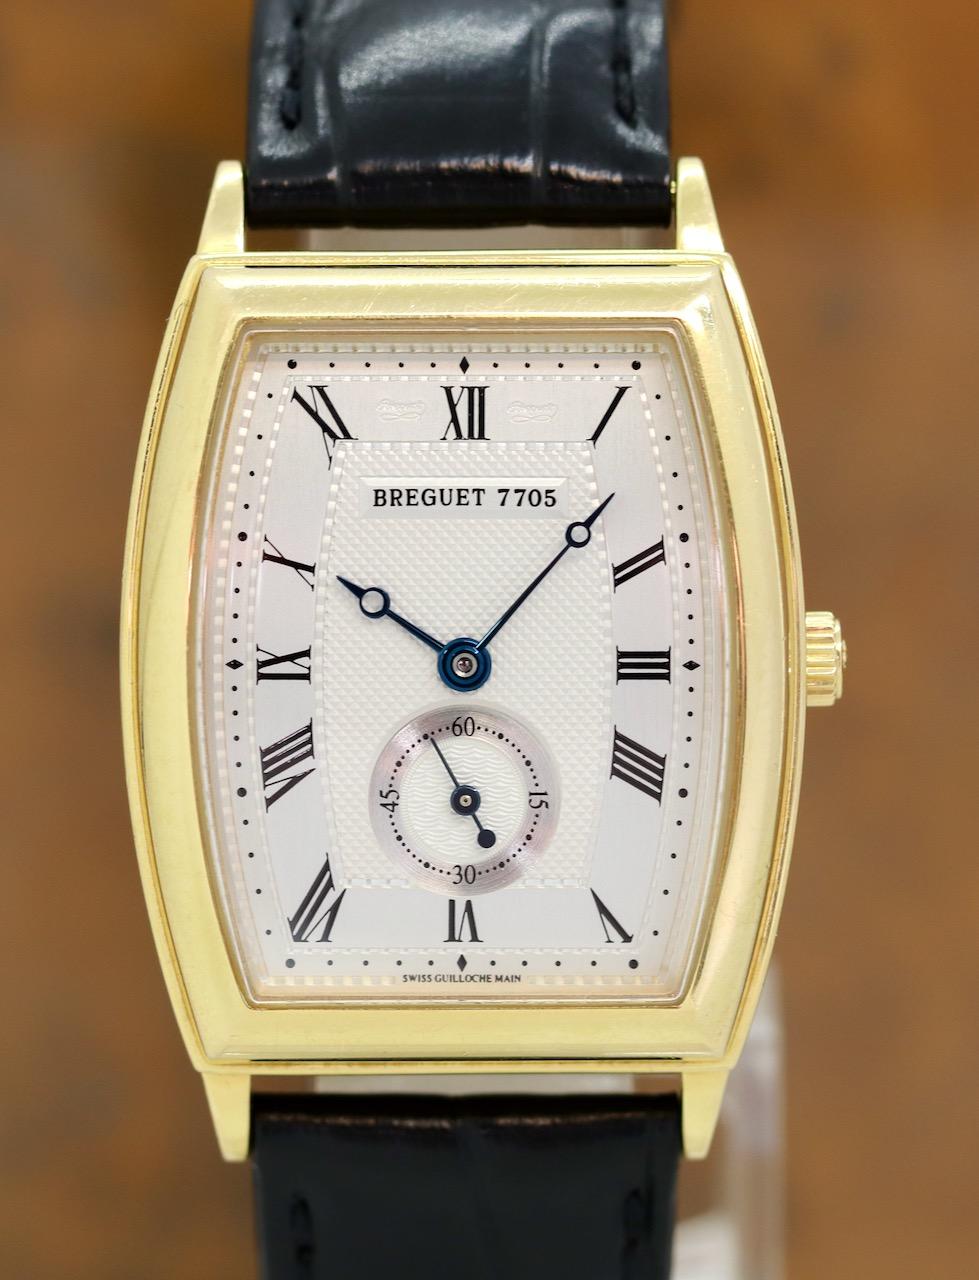 With 18k gold Breguet buckle and original Box and Papers. 

The Breguet Héritage with the reference number 3670 is a masterpiece of traditional watchmaking art that immediately catches the eye with its tonneau shape and 18-carat gold case. The